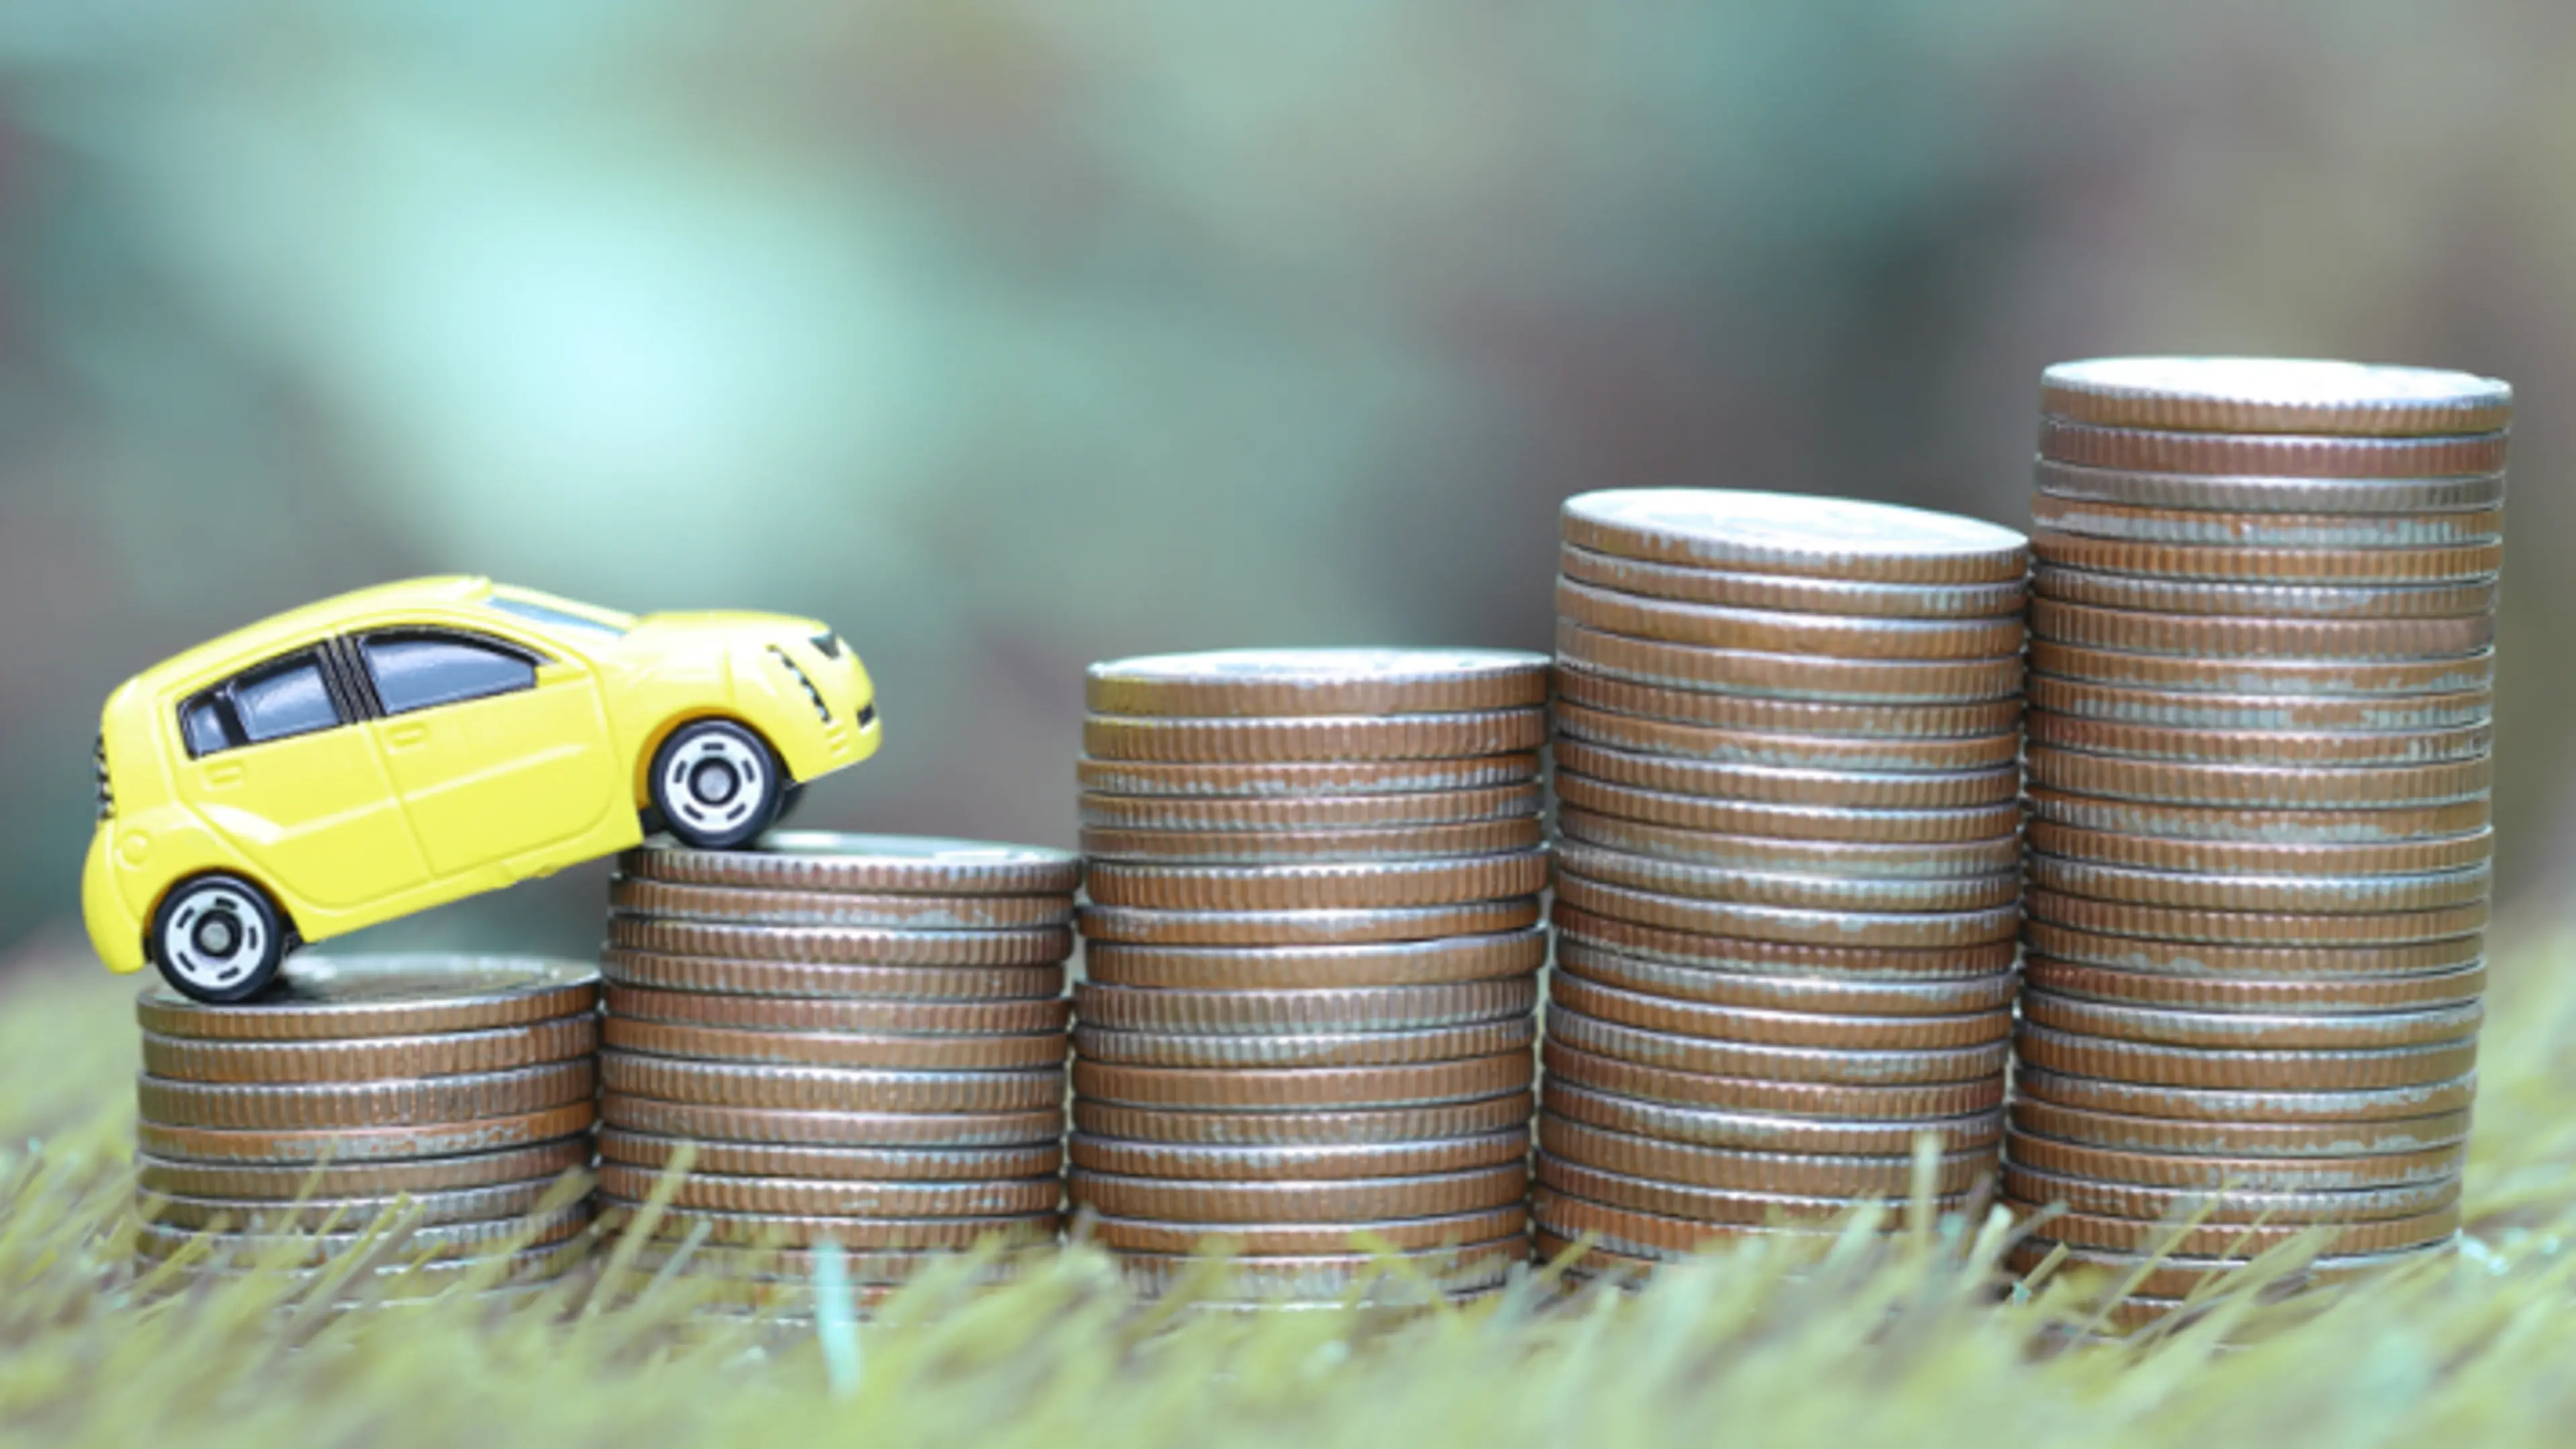 [Funding alert] Used car retailing startup Spinny raises $13.2M in Series A co-led by Accel & SAIF 